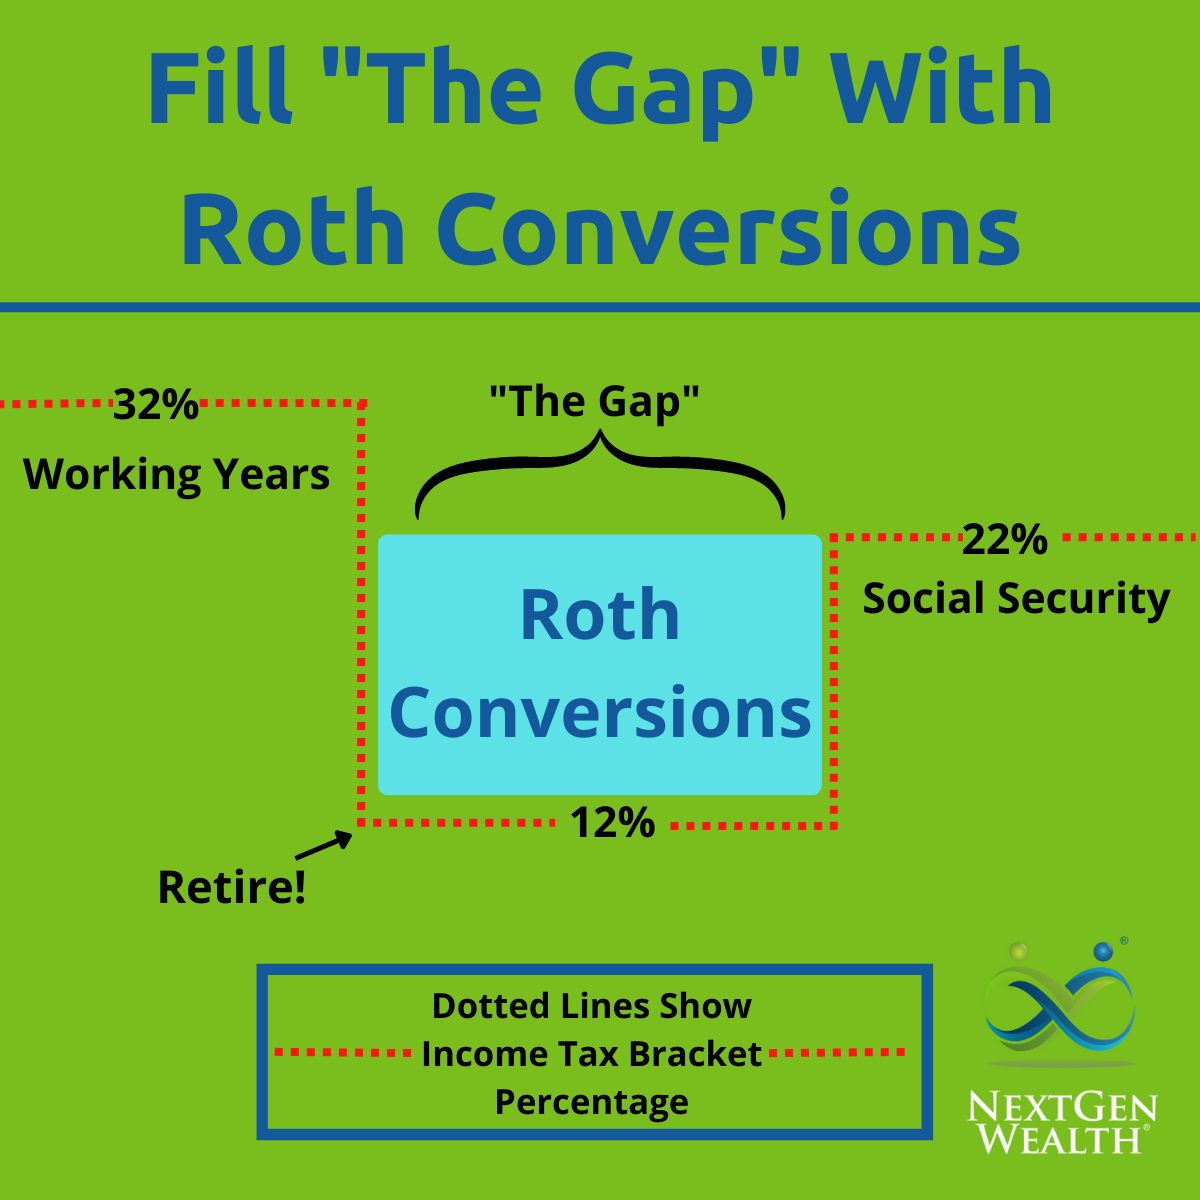 Roth Conversions in Retirement